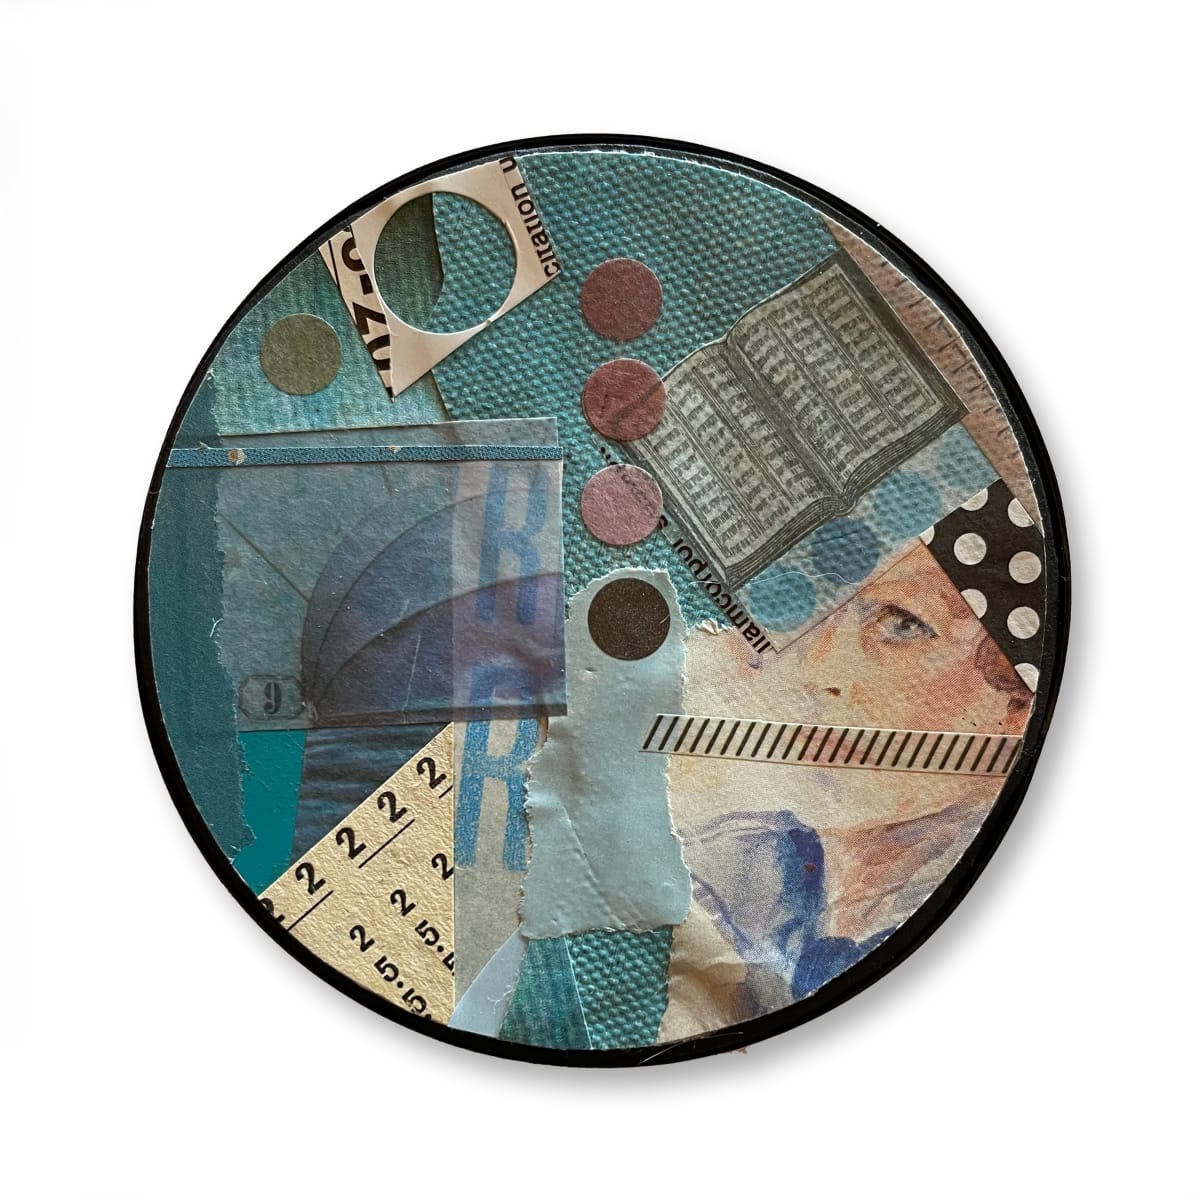 Untitled by Celia Crane  Image: Celia Crane, Untitled, 2021, 3 x 3 in, New York, USA, Coffee Cup Lid Collage